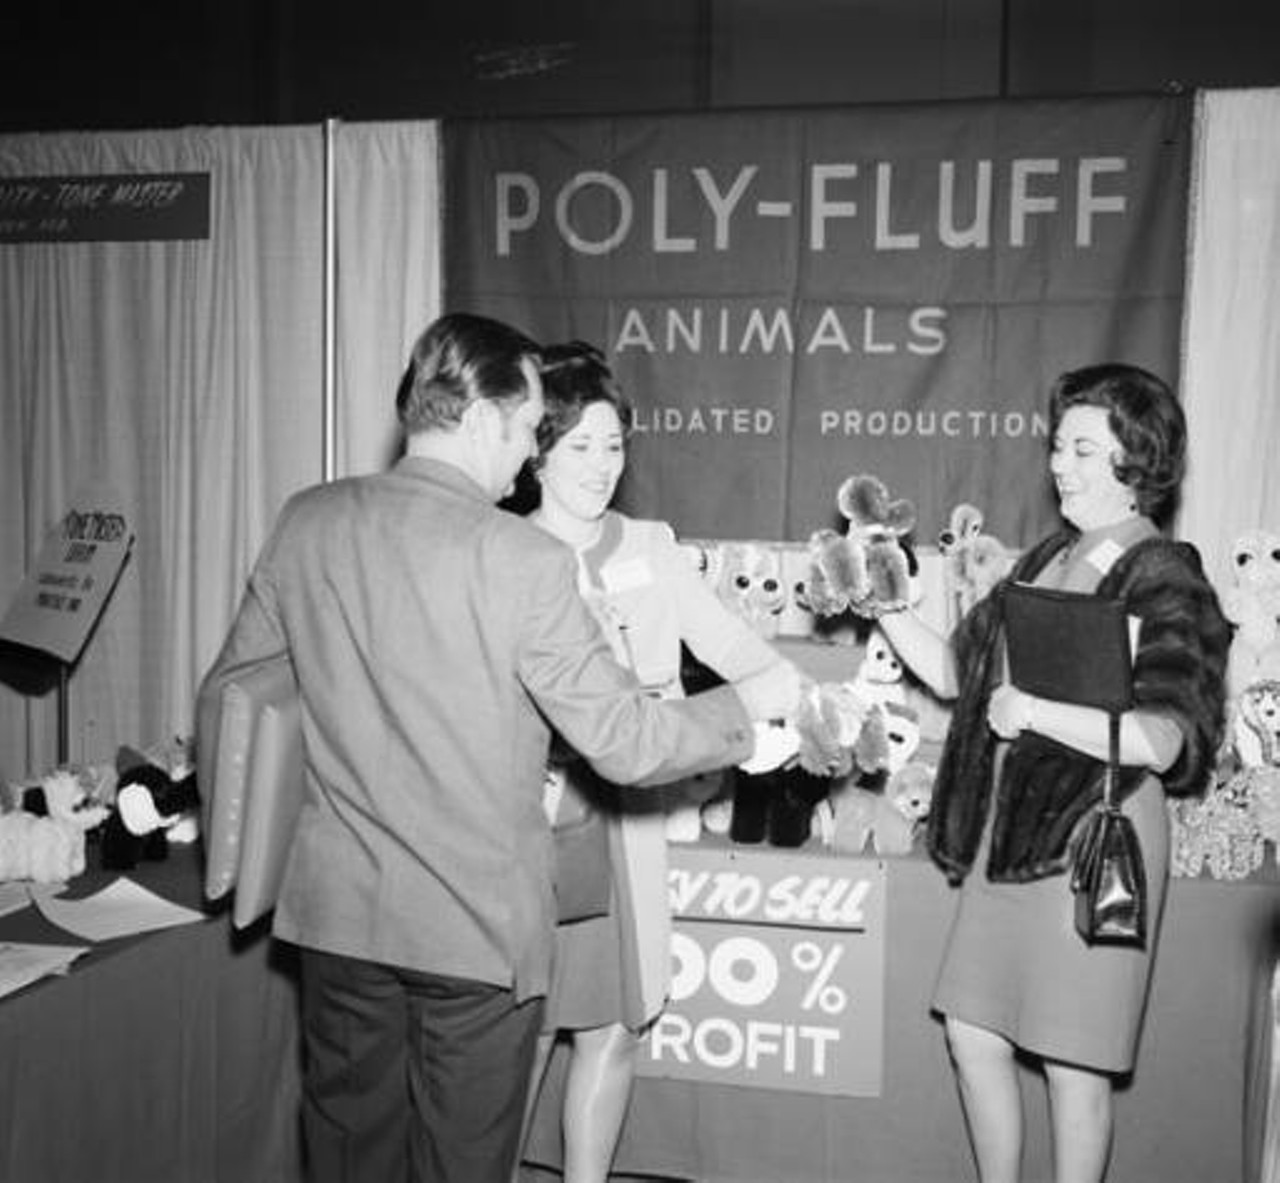 Poly-Fluff Animal Display During Music Educatior’s Convention, 1969
While the Poly-Fluff Animals brand doesn’t exist anymore, similar products still do.
Photo via Zintgraff Studio Photo Collection